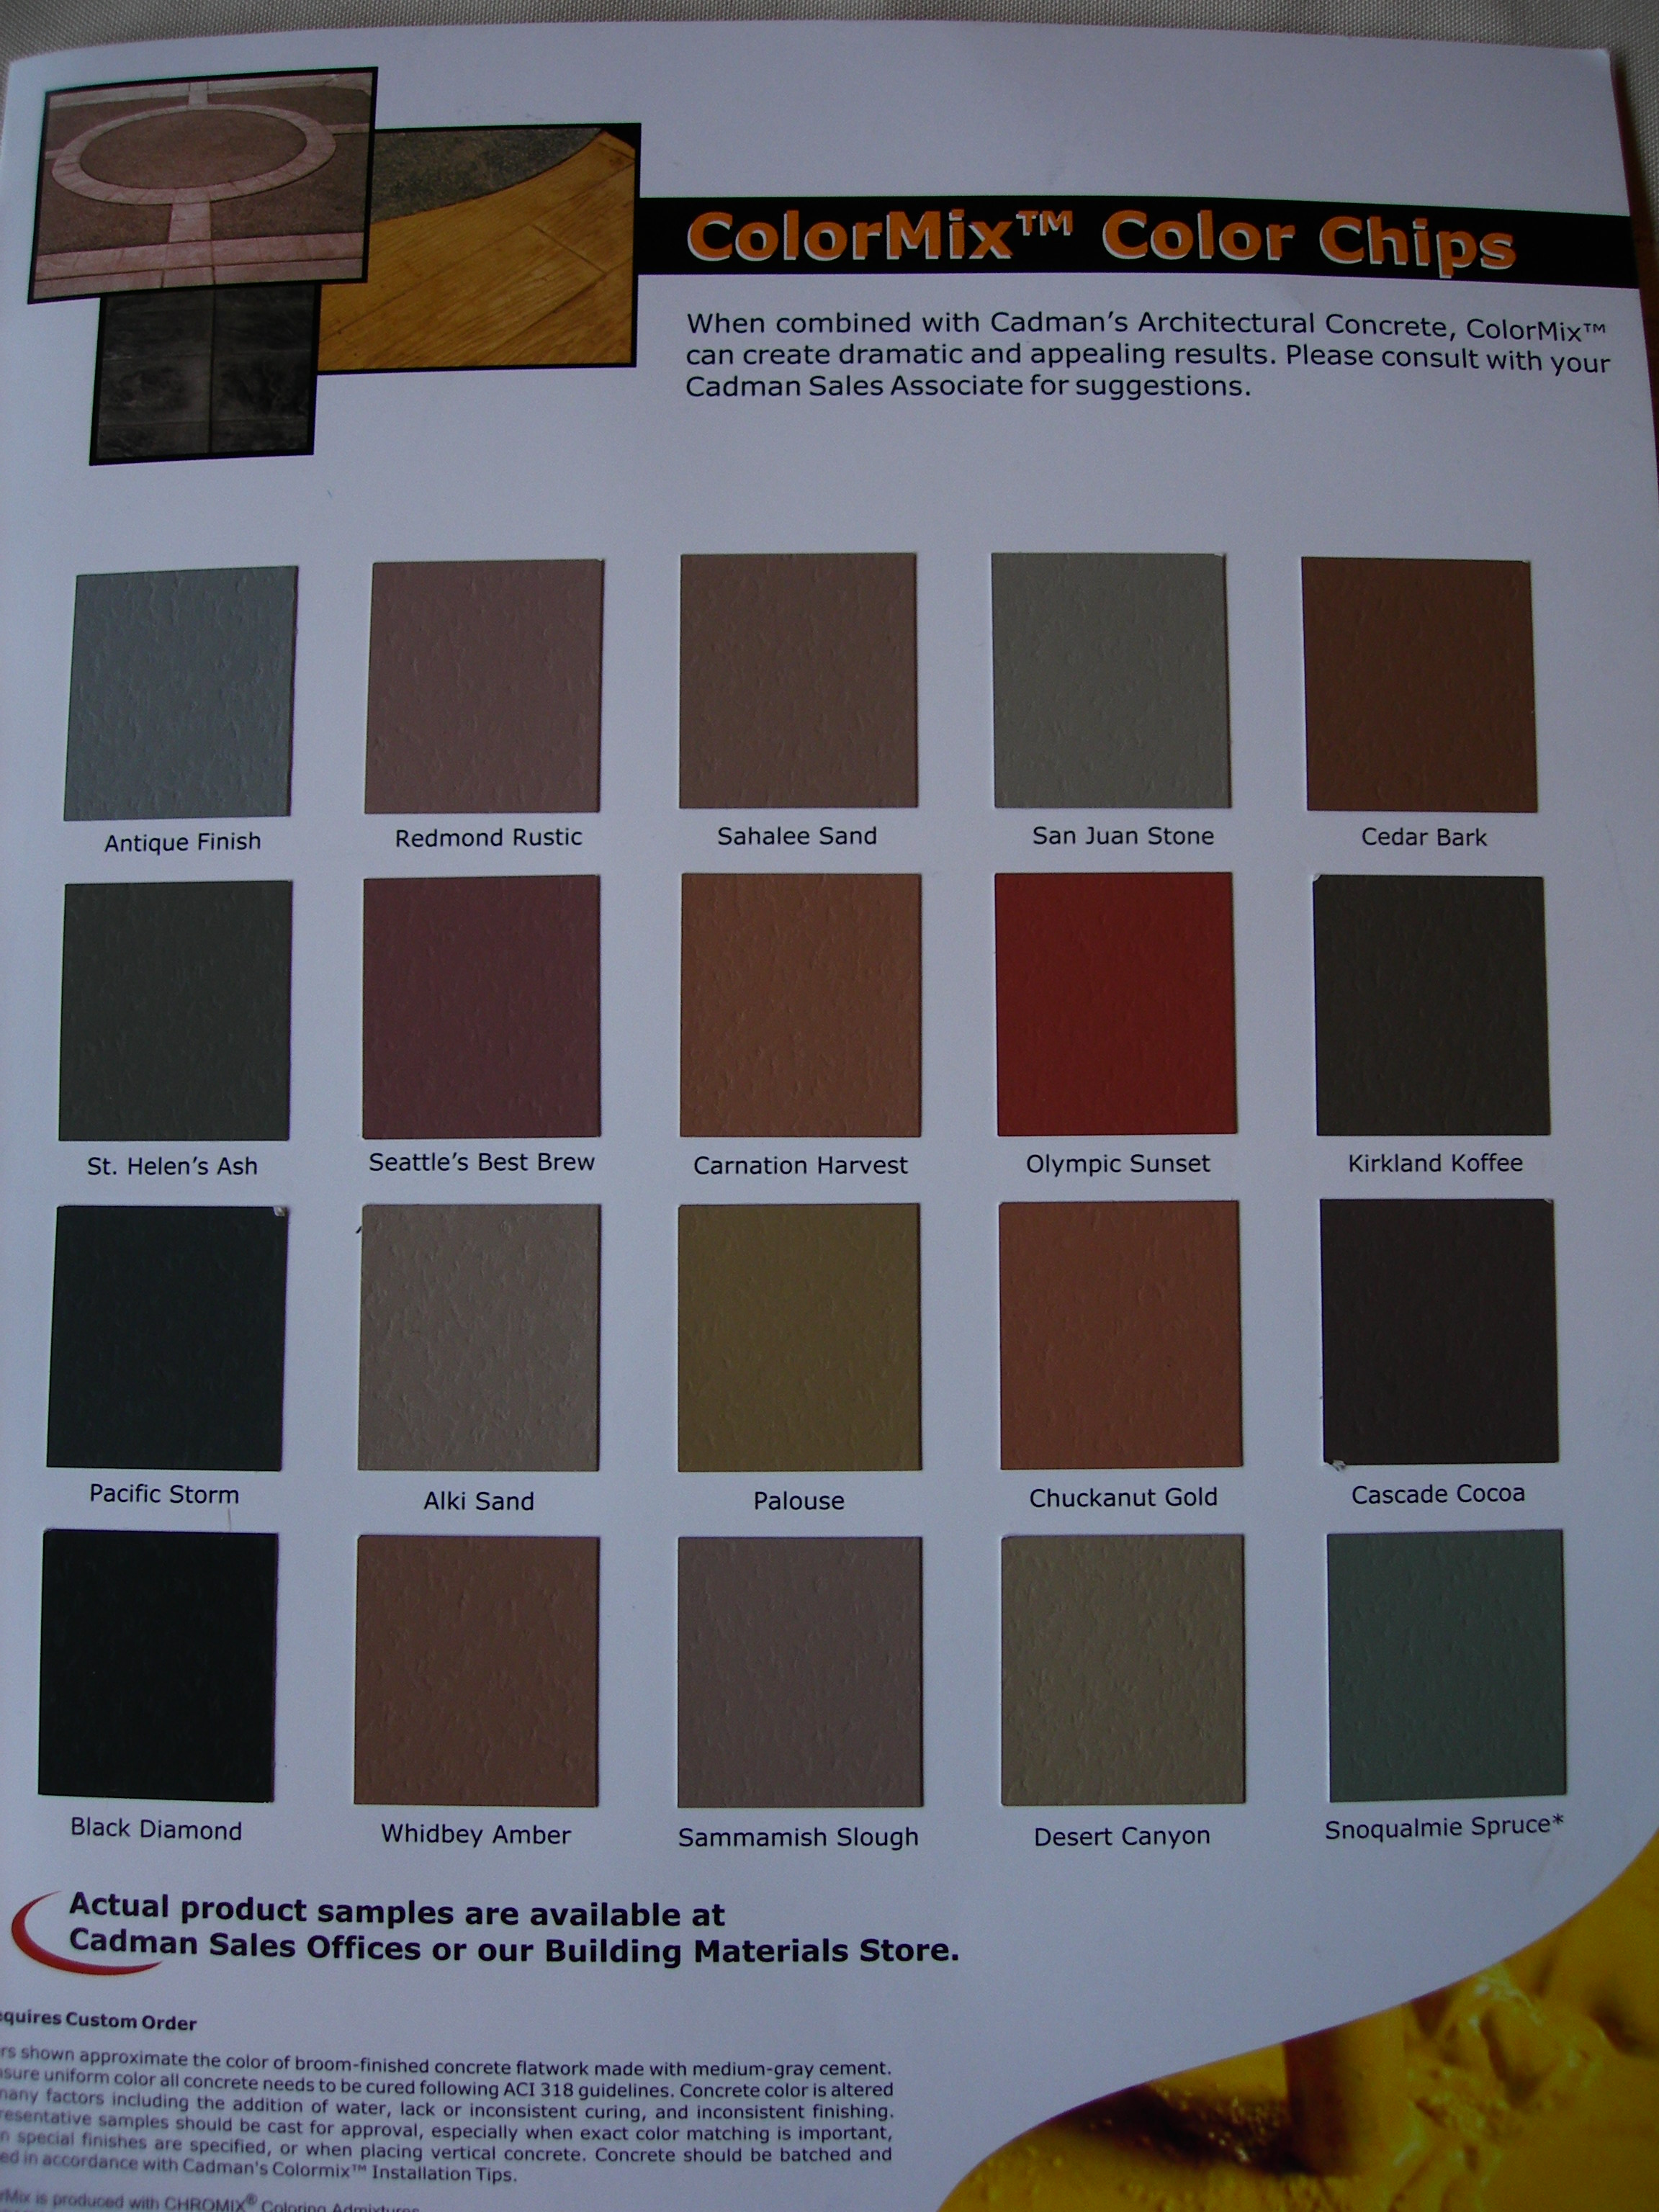 newcolorchart.jpg